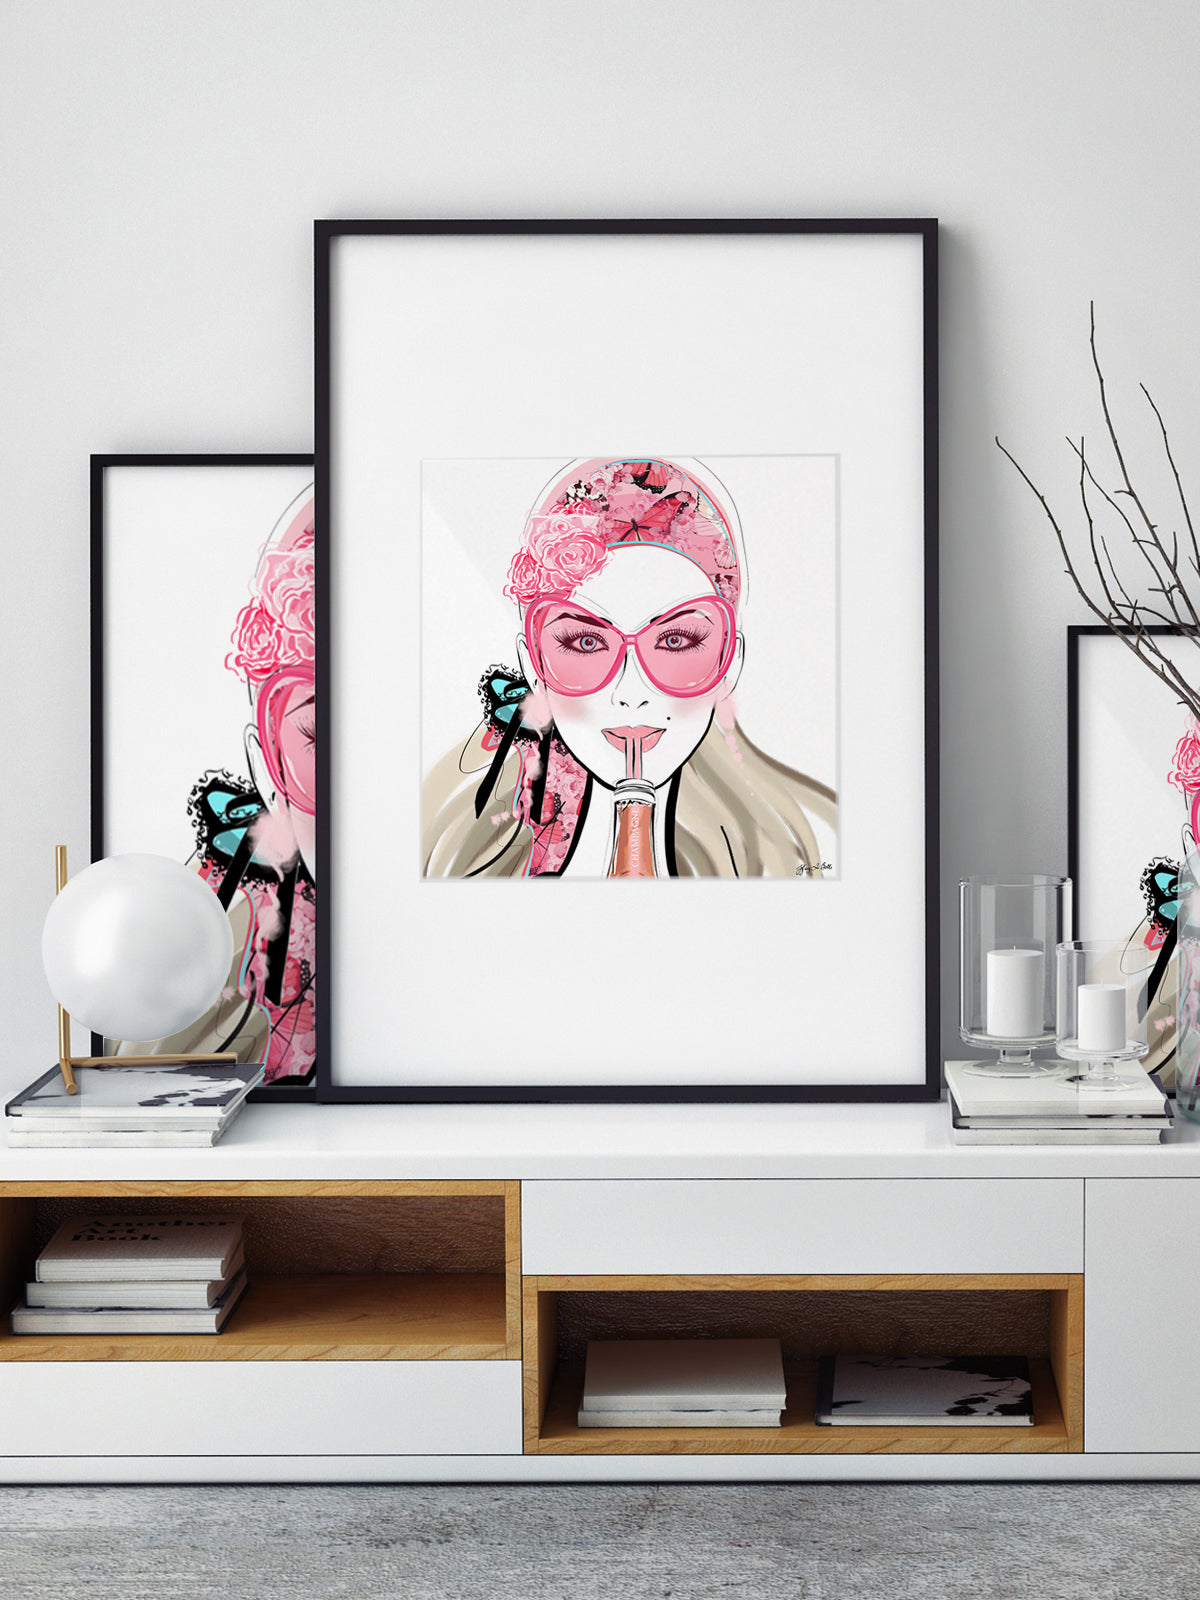 Who Needs a Glass? - Illustration - Limited Edition Print - Tiffany La Belle